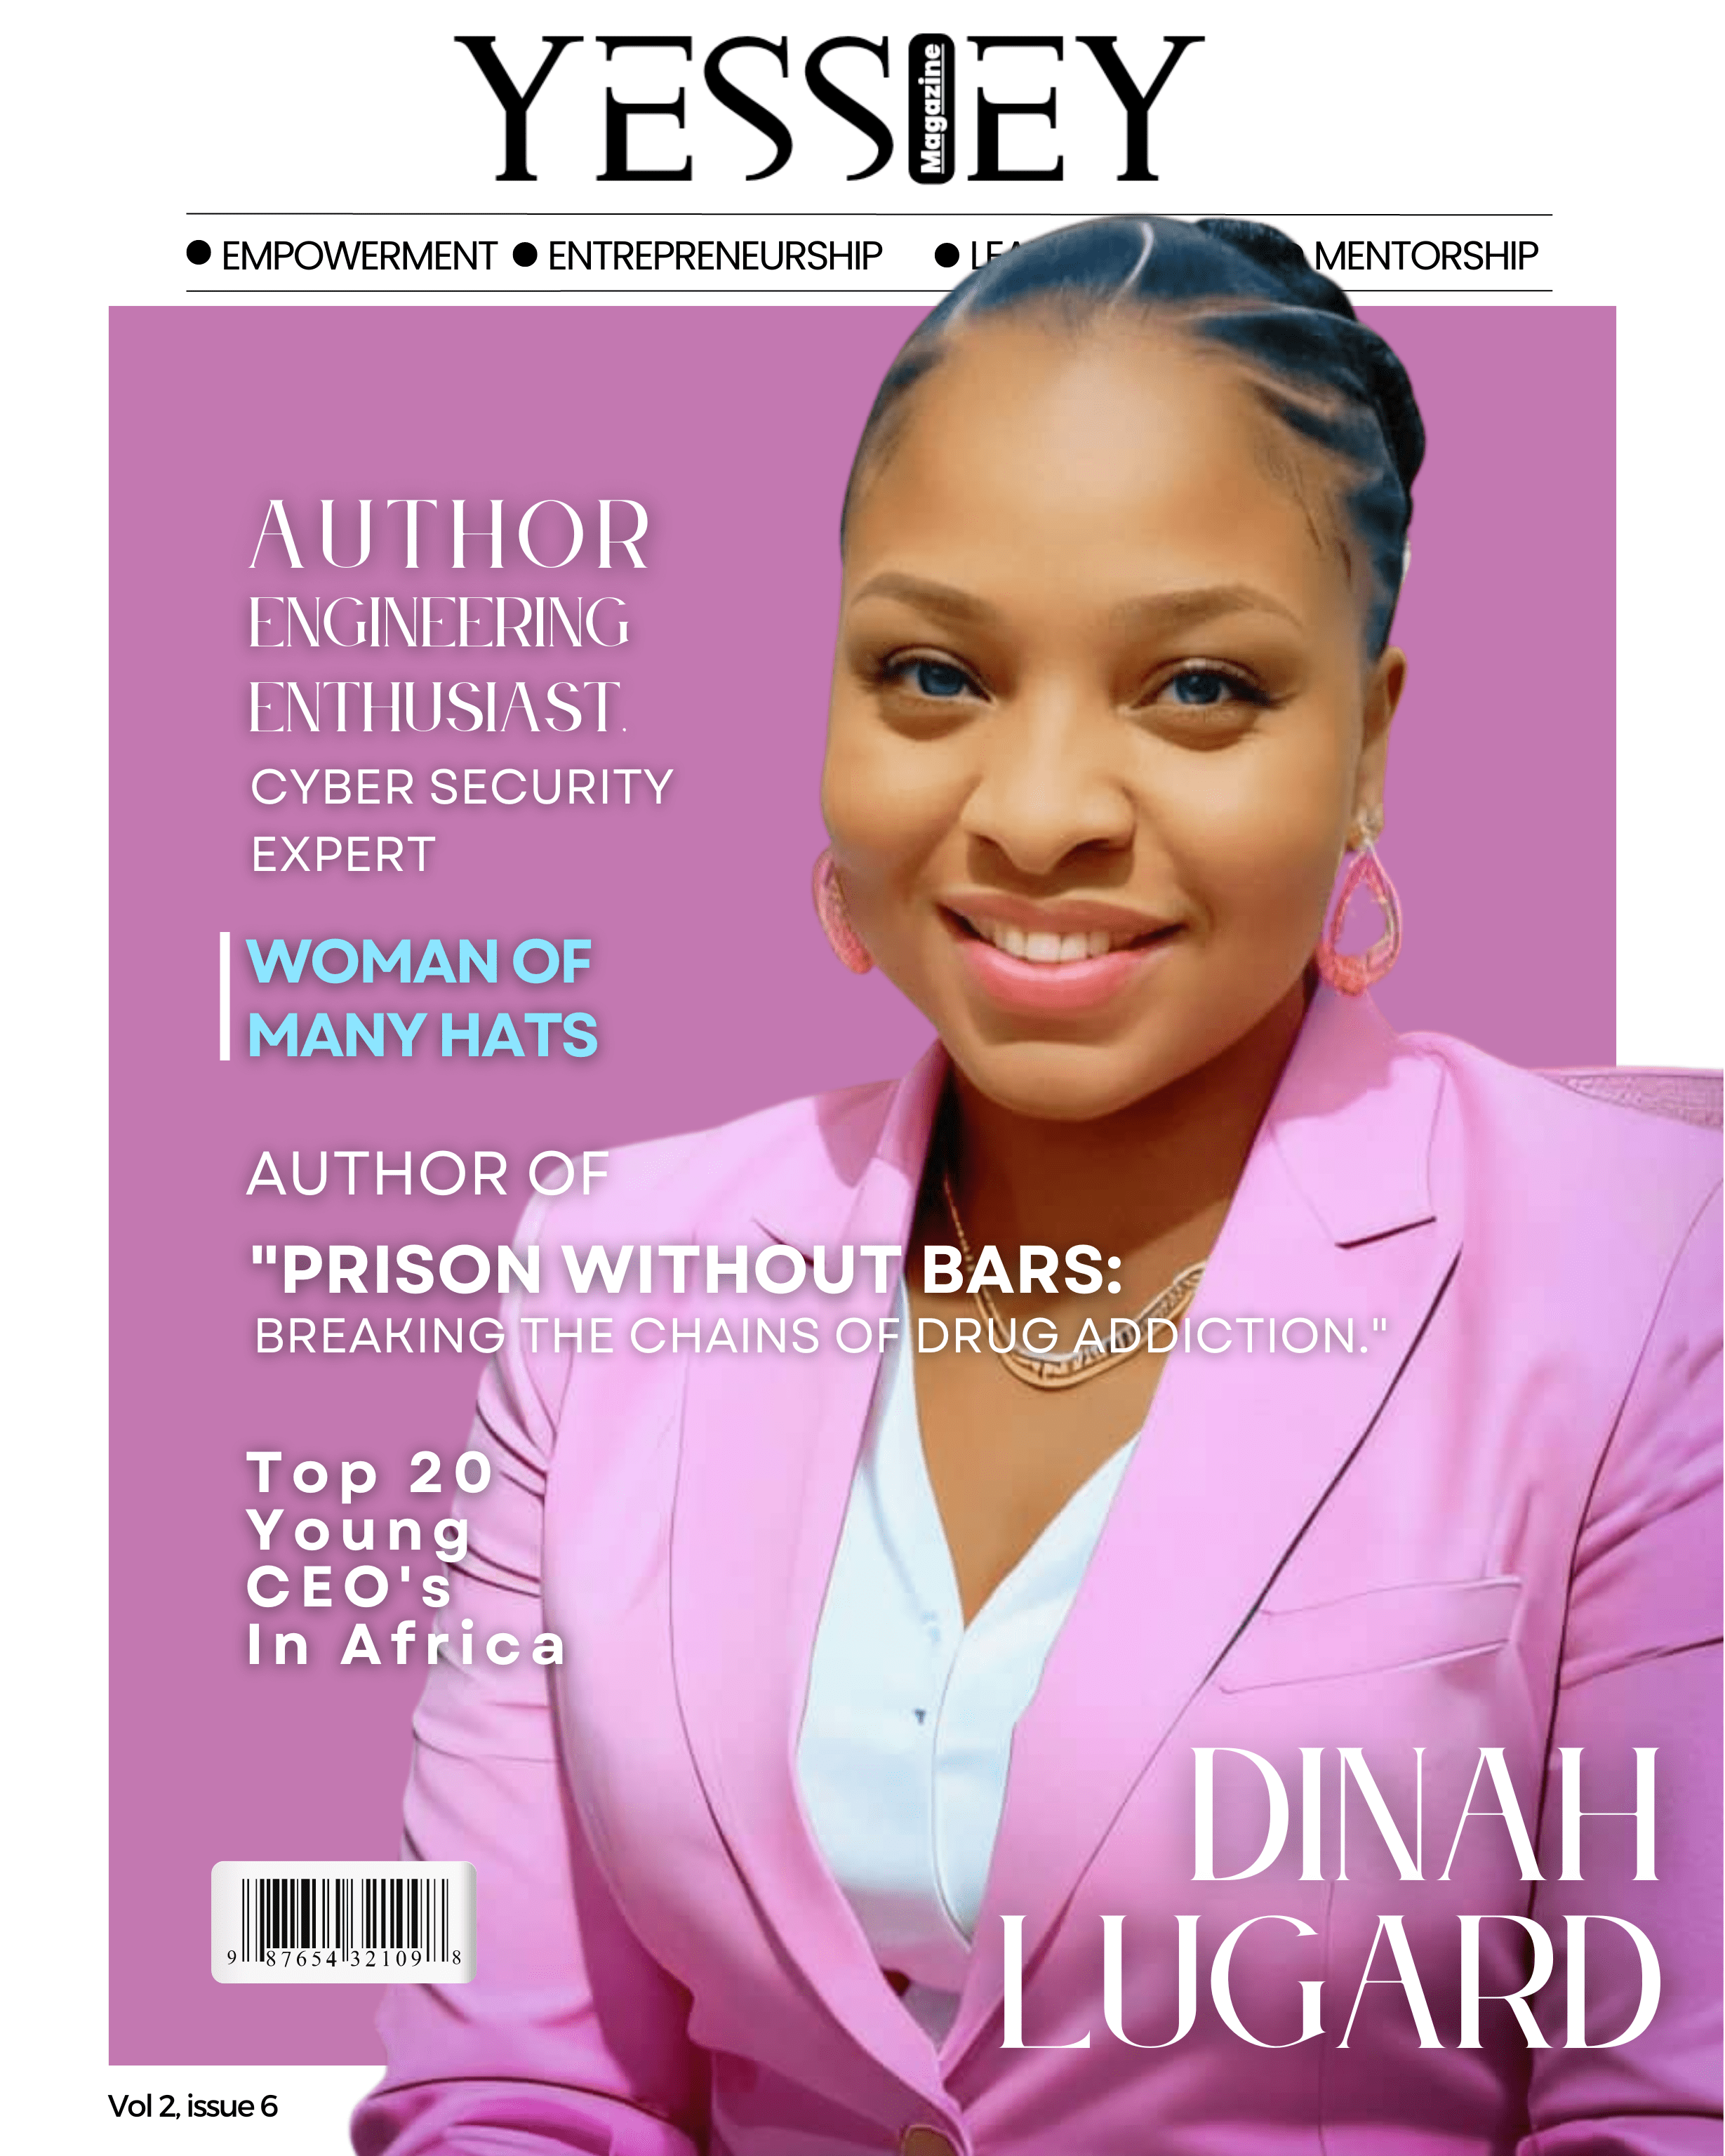 Dinah Lugard Covers Yessiey Magazine Talks About Her Book, Initiative And Documentary.